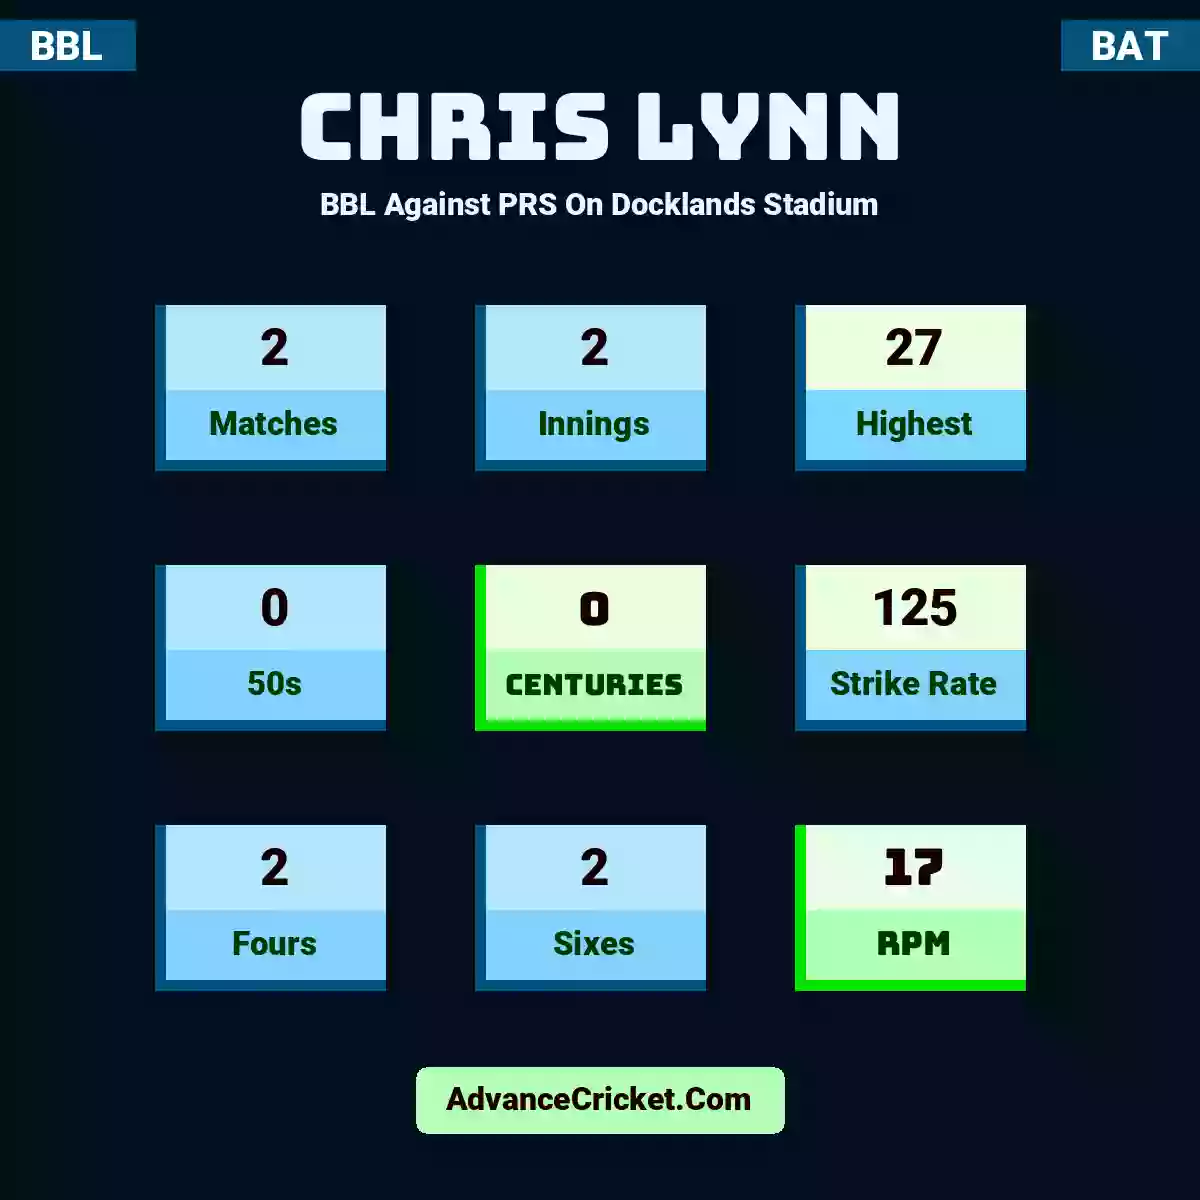 Chris Lynn BBL  Against PRS On Docklands Stadium, Chris Lynn played 2 matches, scored 27 runs as highest, 0 half-centuries, and 0 centuries, with a strike rate of 125. C.Lynn hit 2 fours and 2 sixes, with an RPM of 17.